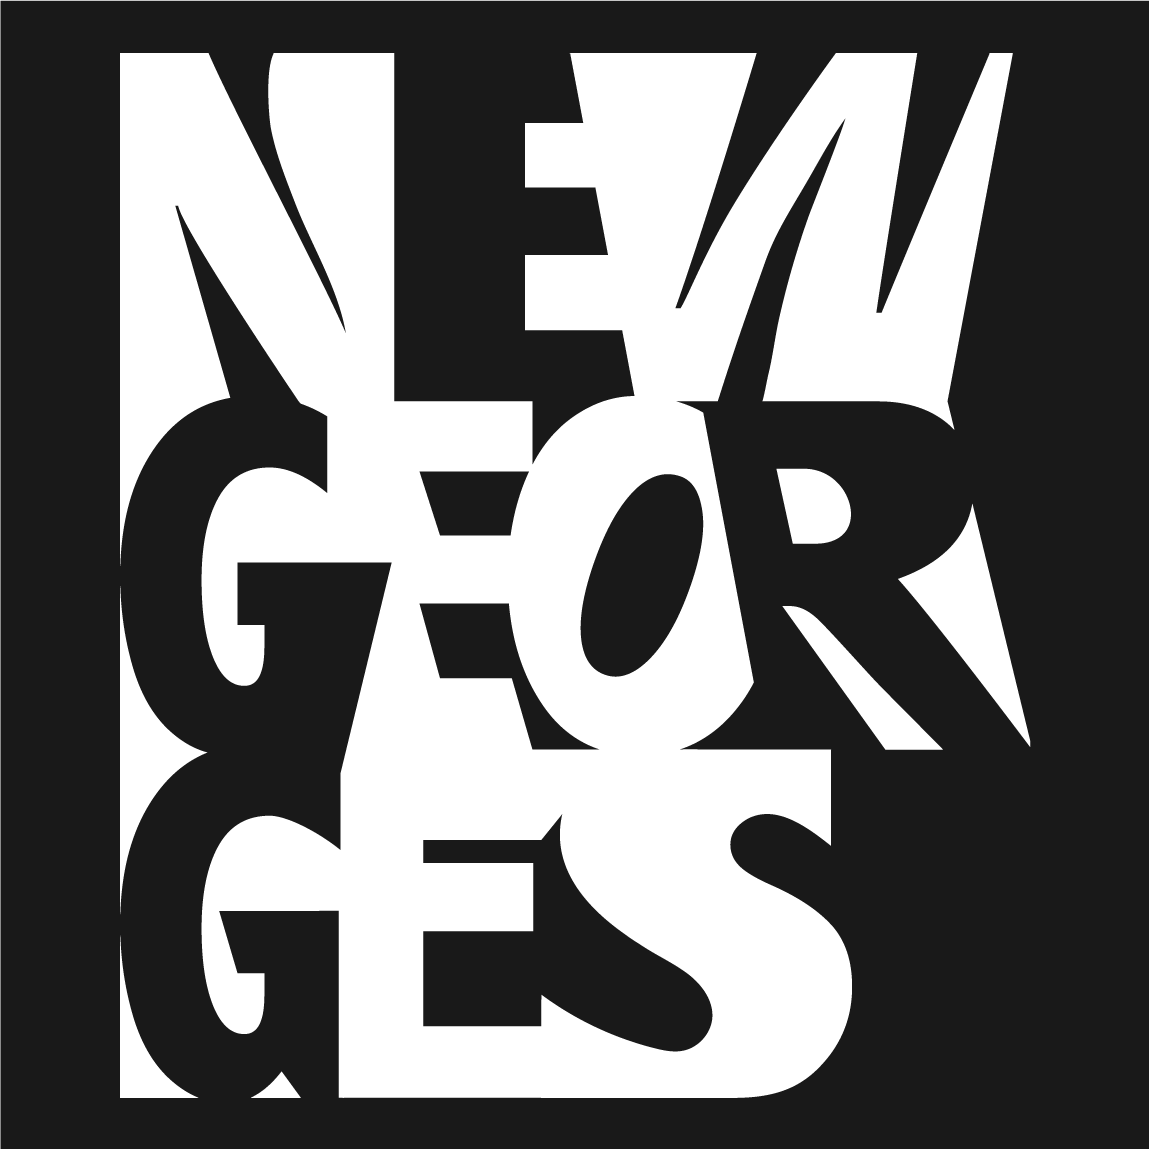 New Georges JUST CAN'T GET ENOUGH! shirt design - zoomed